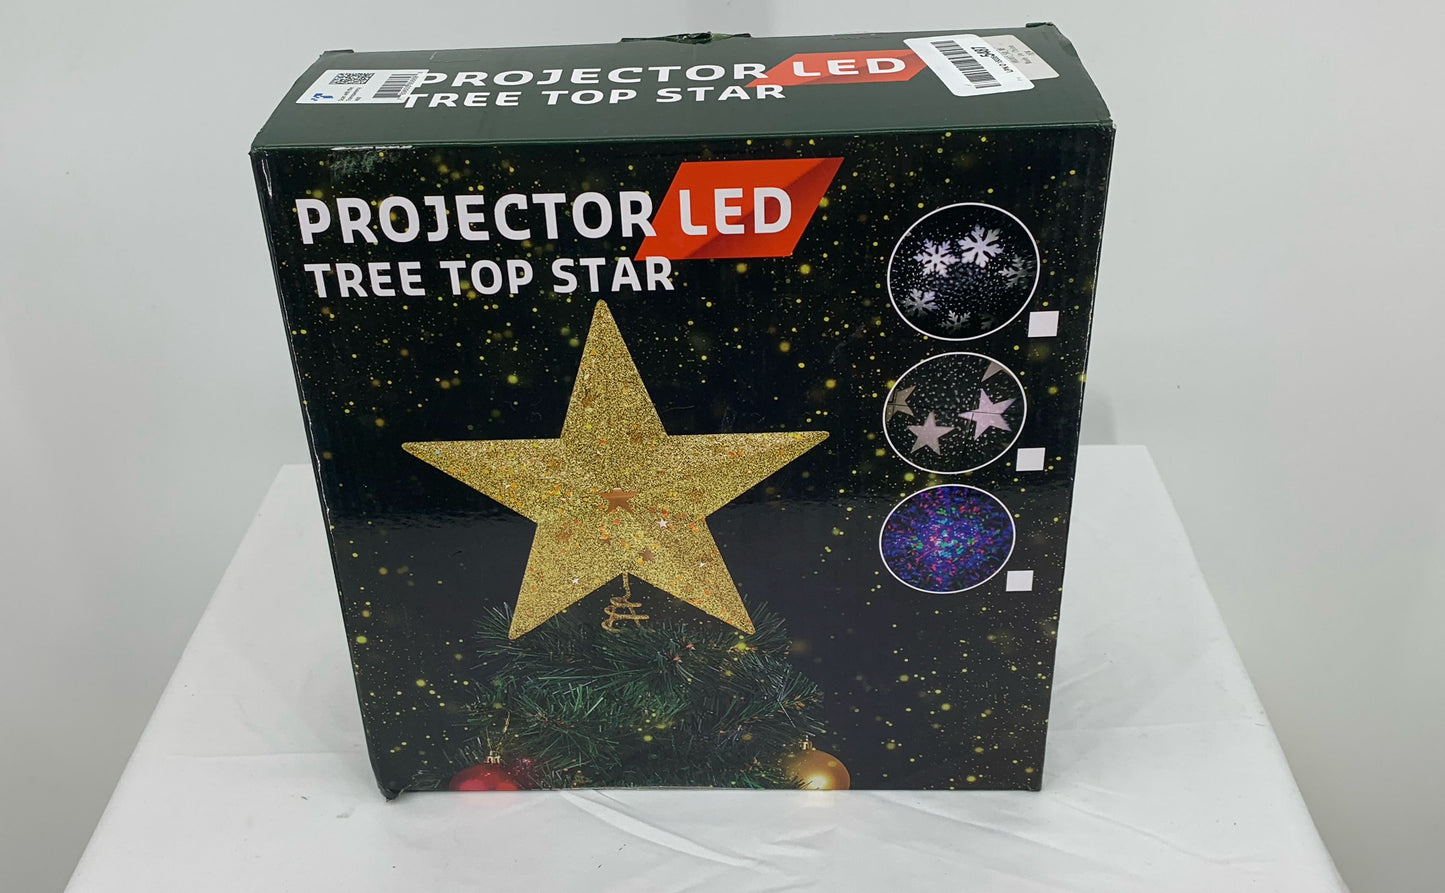 IPOW LED Snowflake Projector Golden Star Christmas Tree Topper Decoration 11.3"